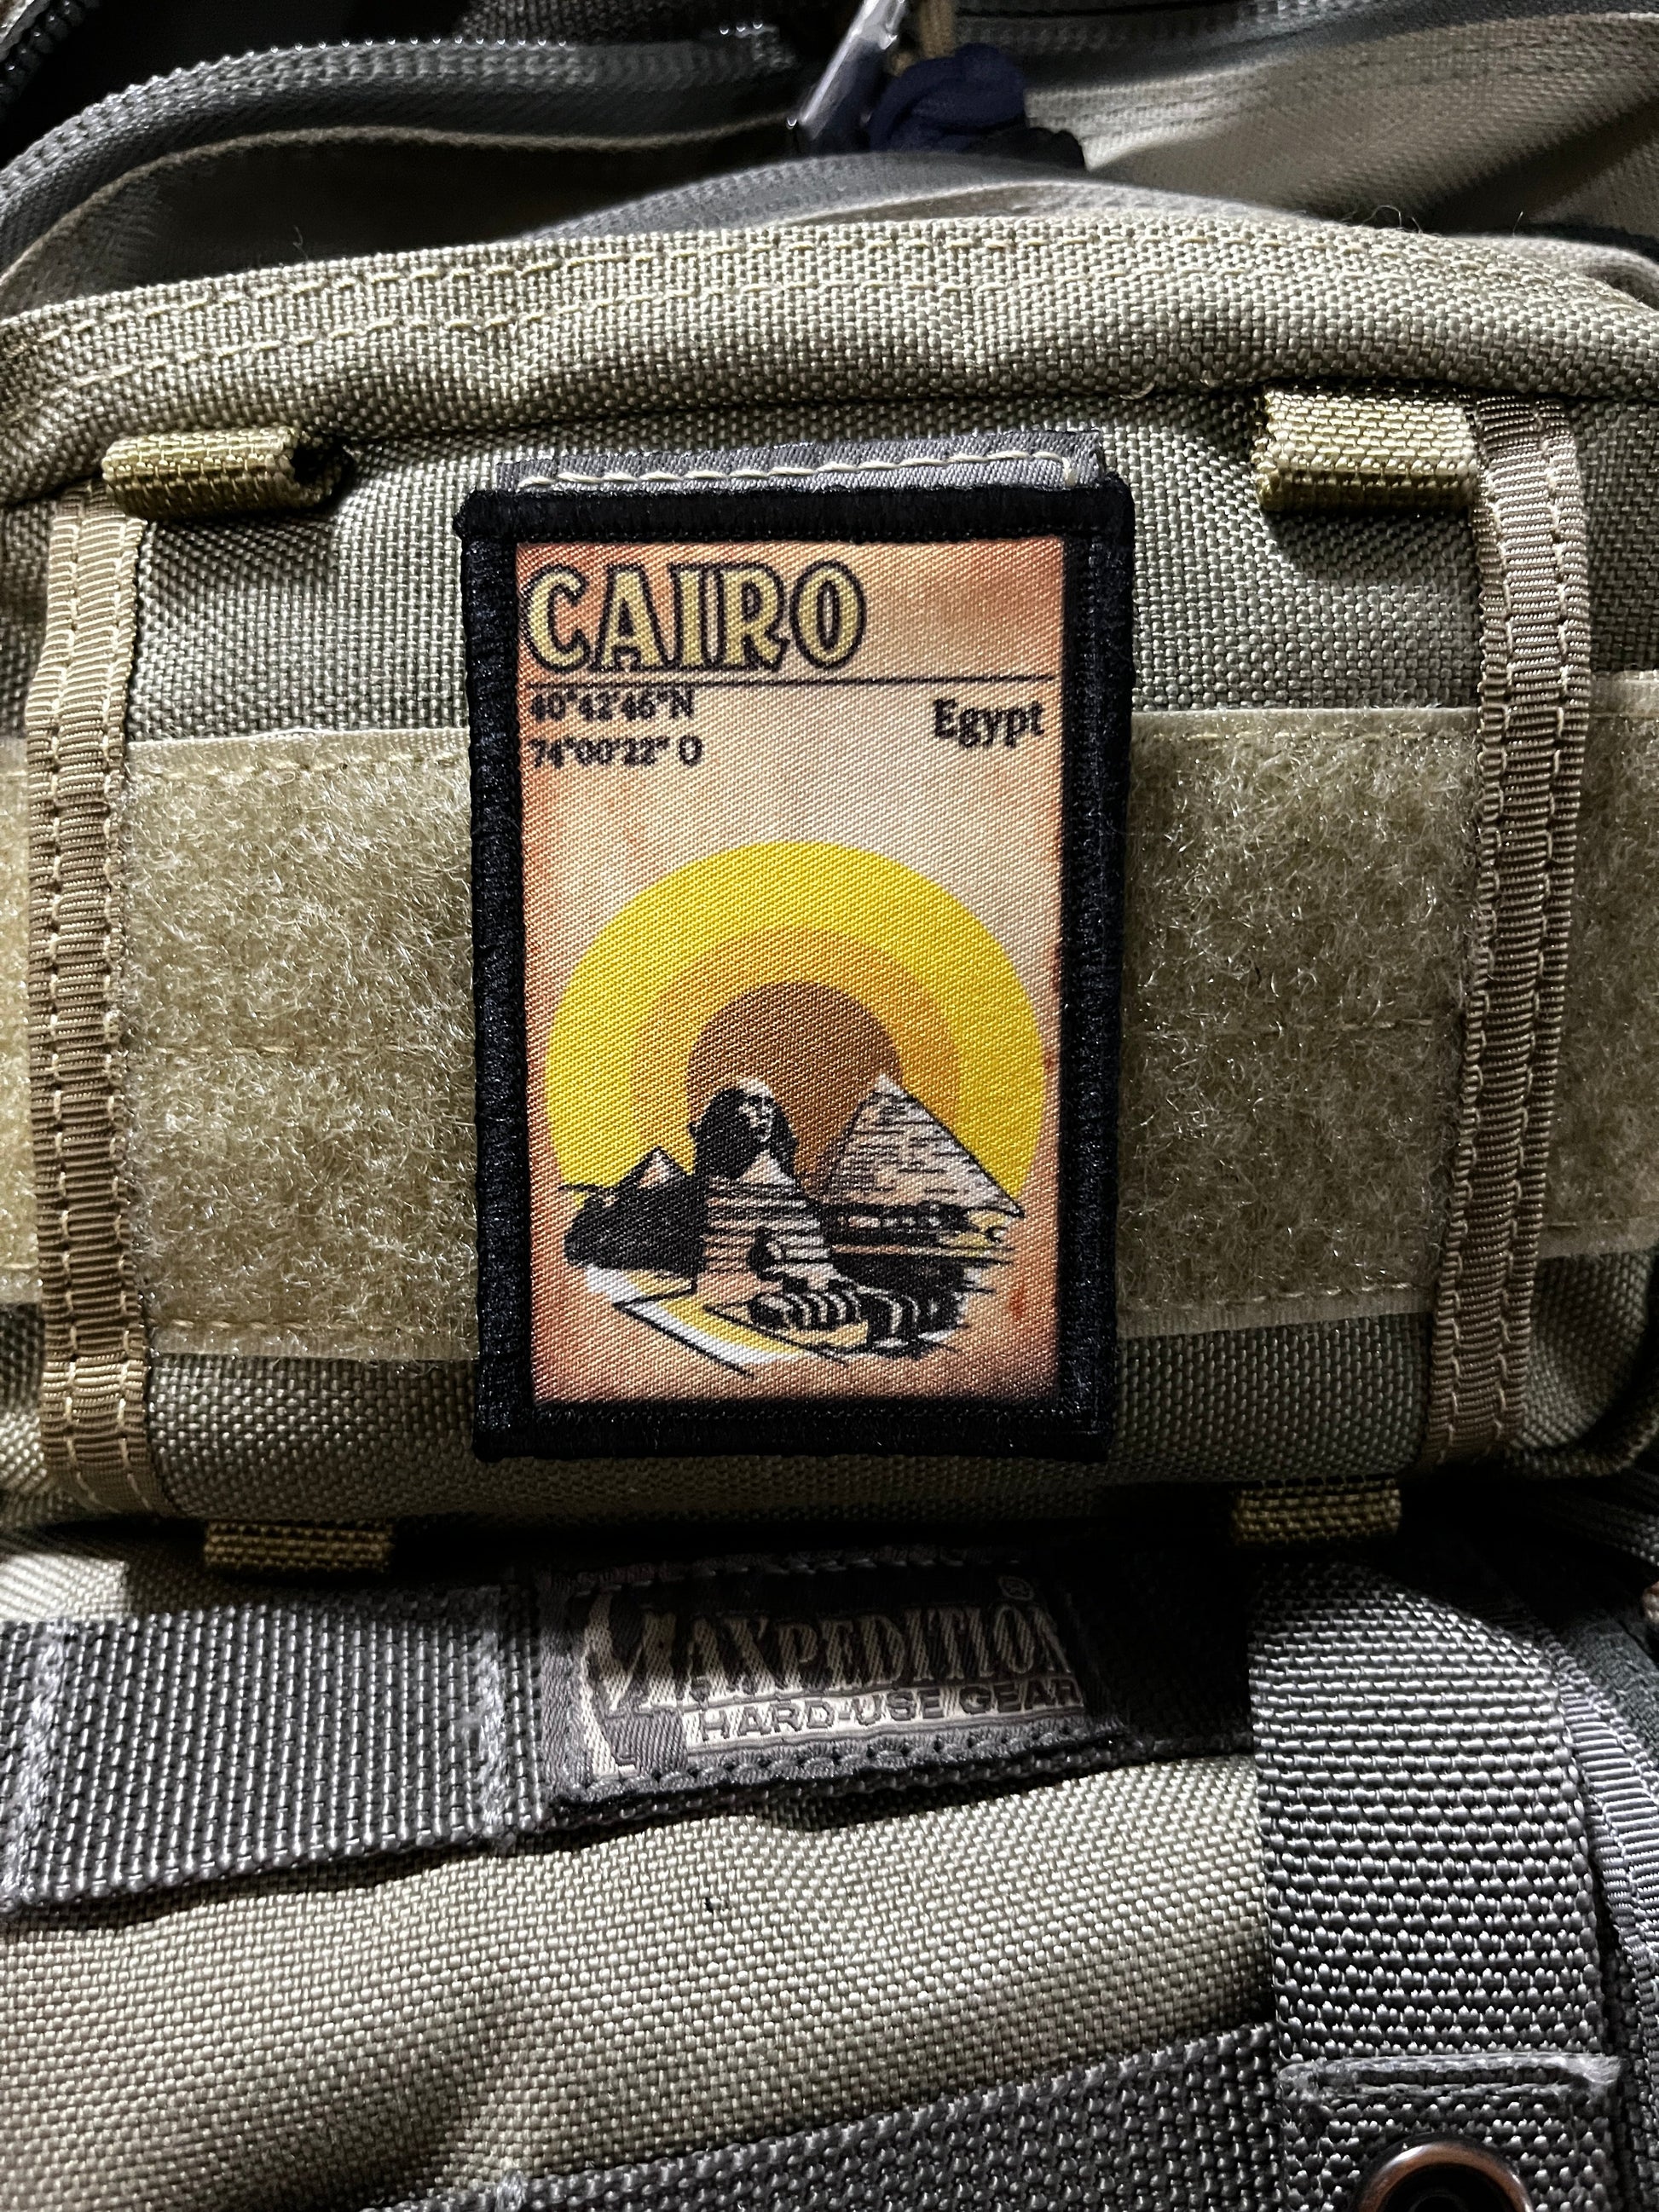 Cairo Egypt Pyramids Morale Patch 2x3" Morale Patches Redheaded T Shirts 